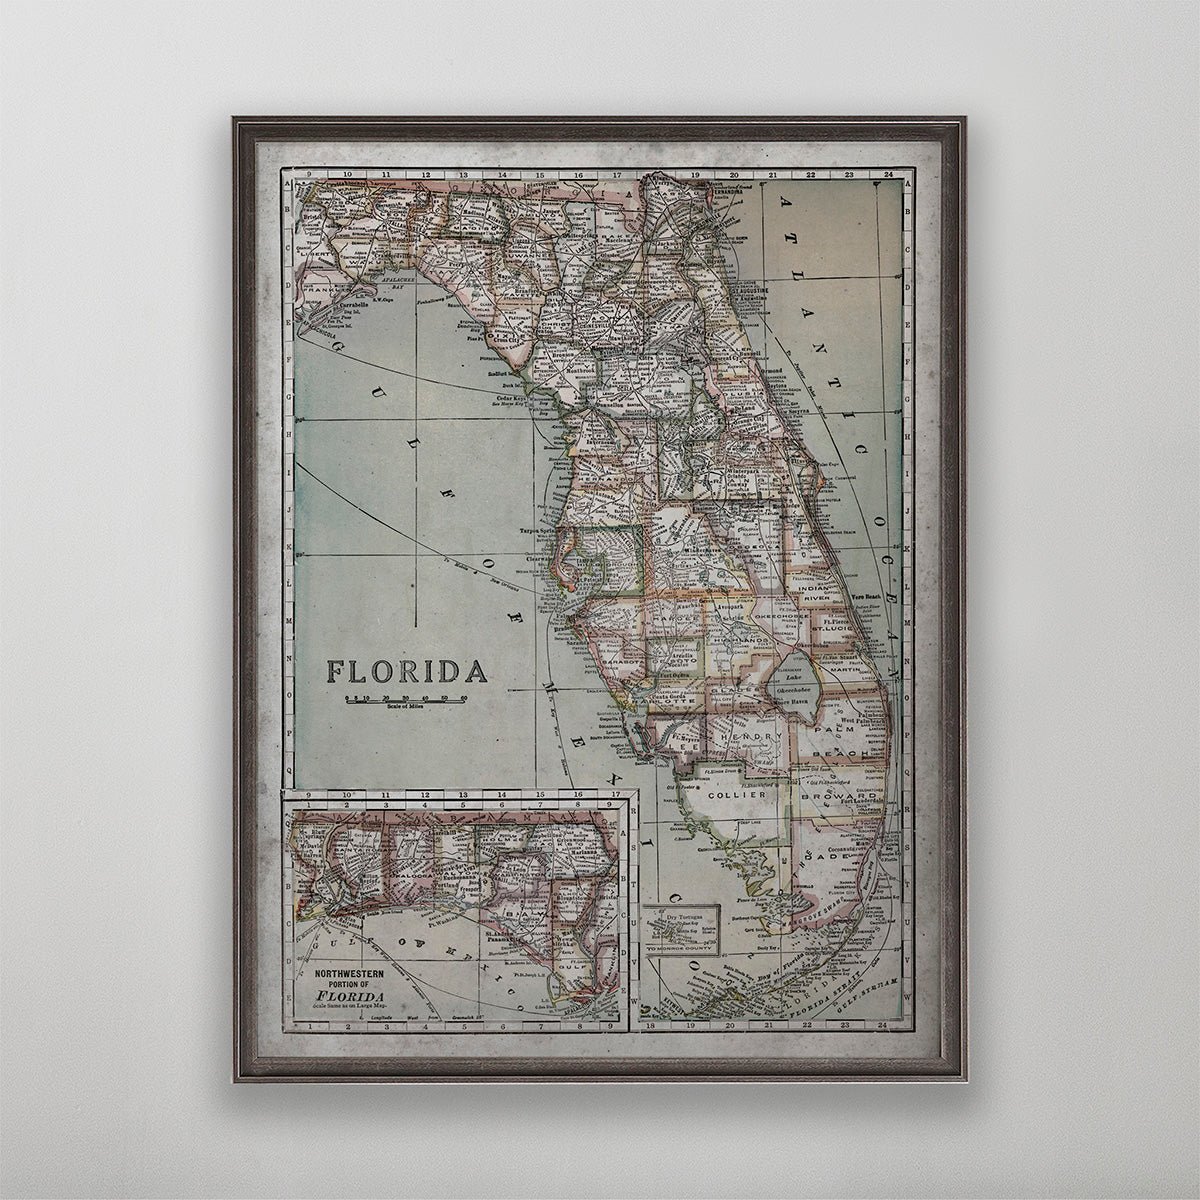 Old vintage historic map of Florida 20th century for wall art home decor. 